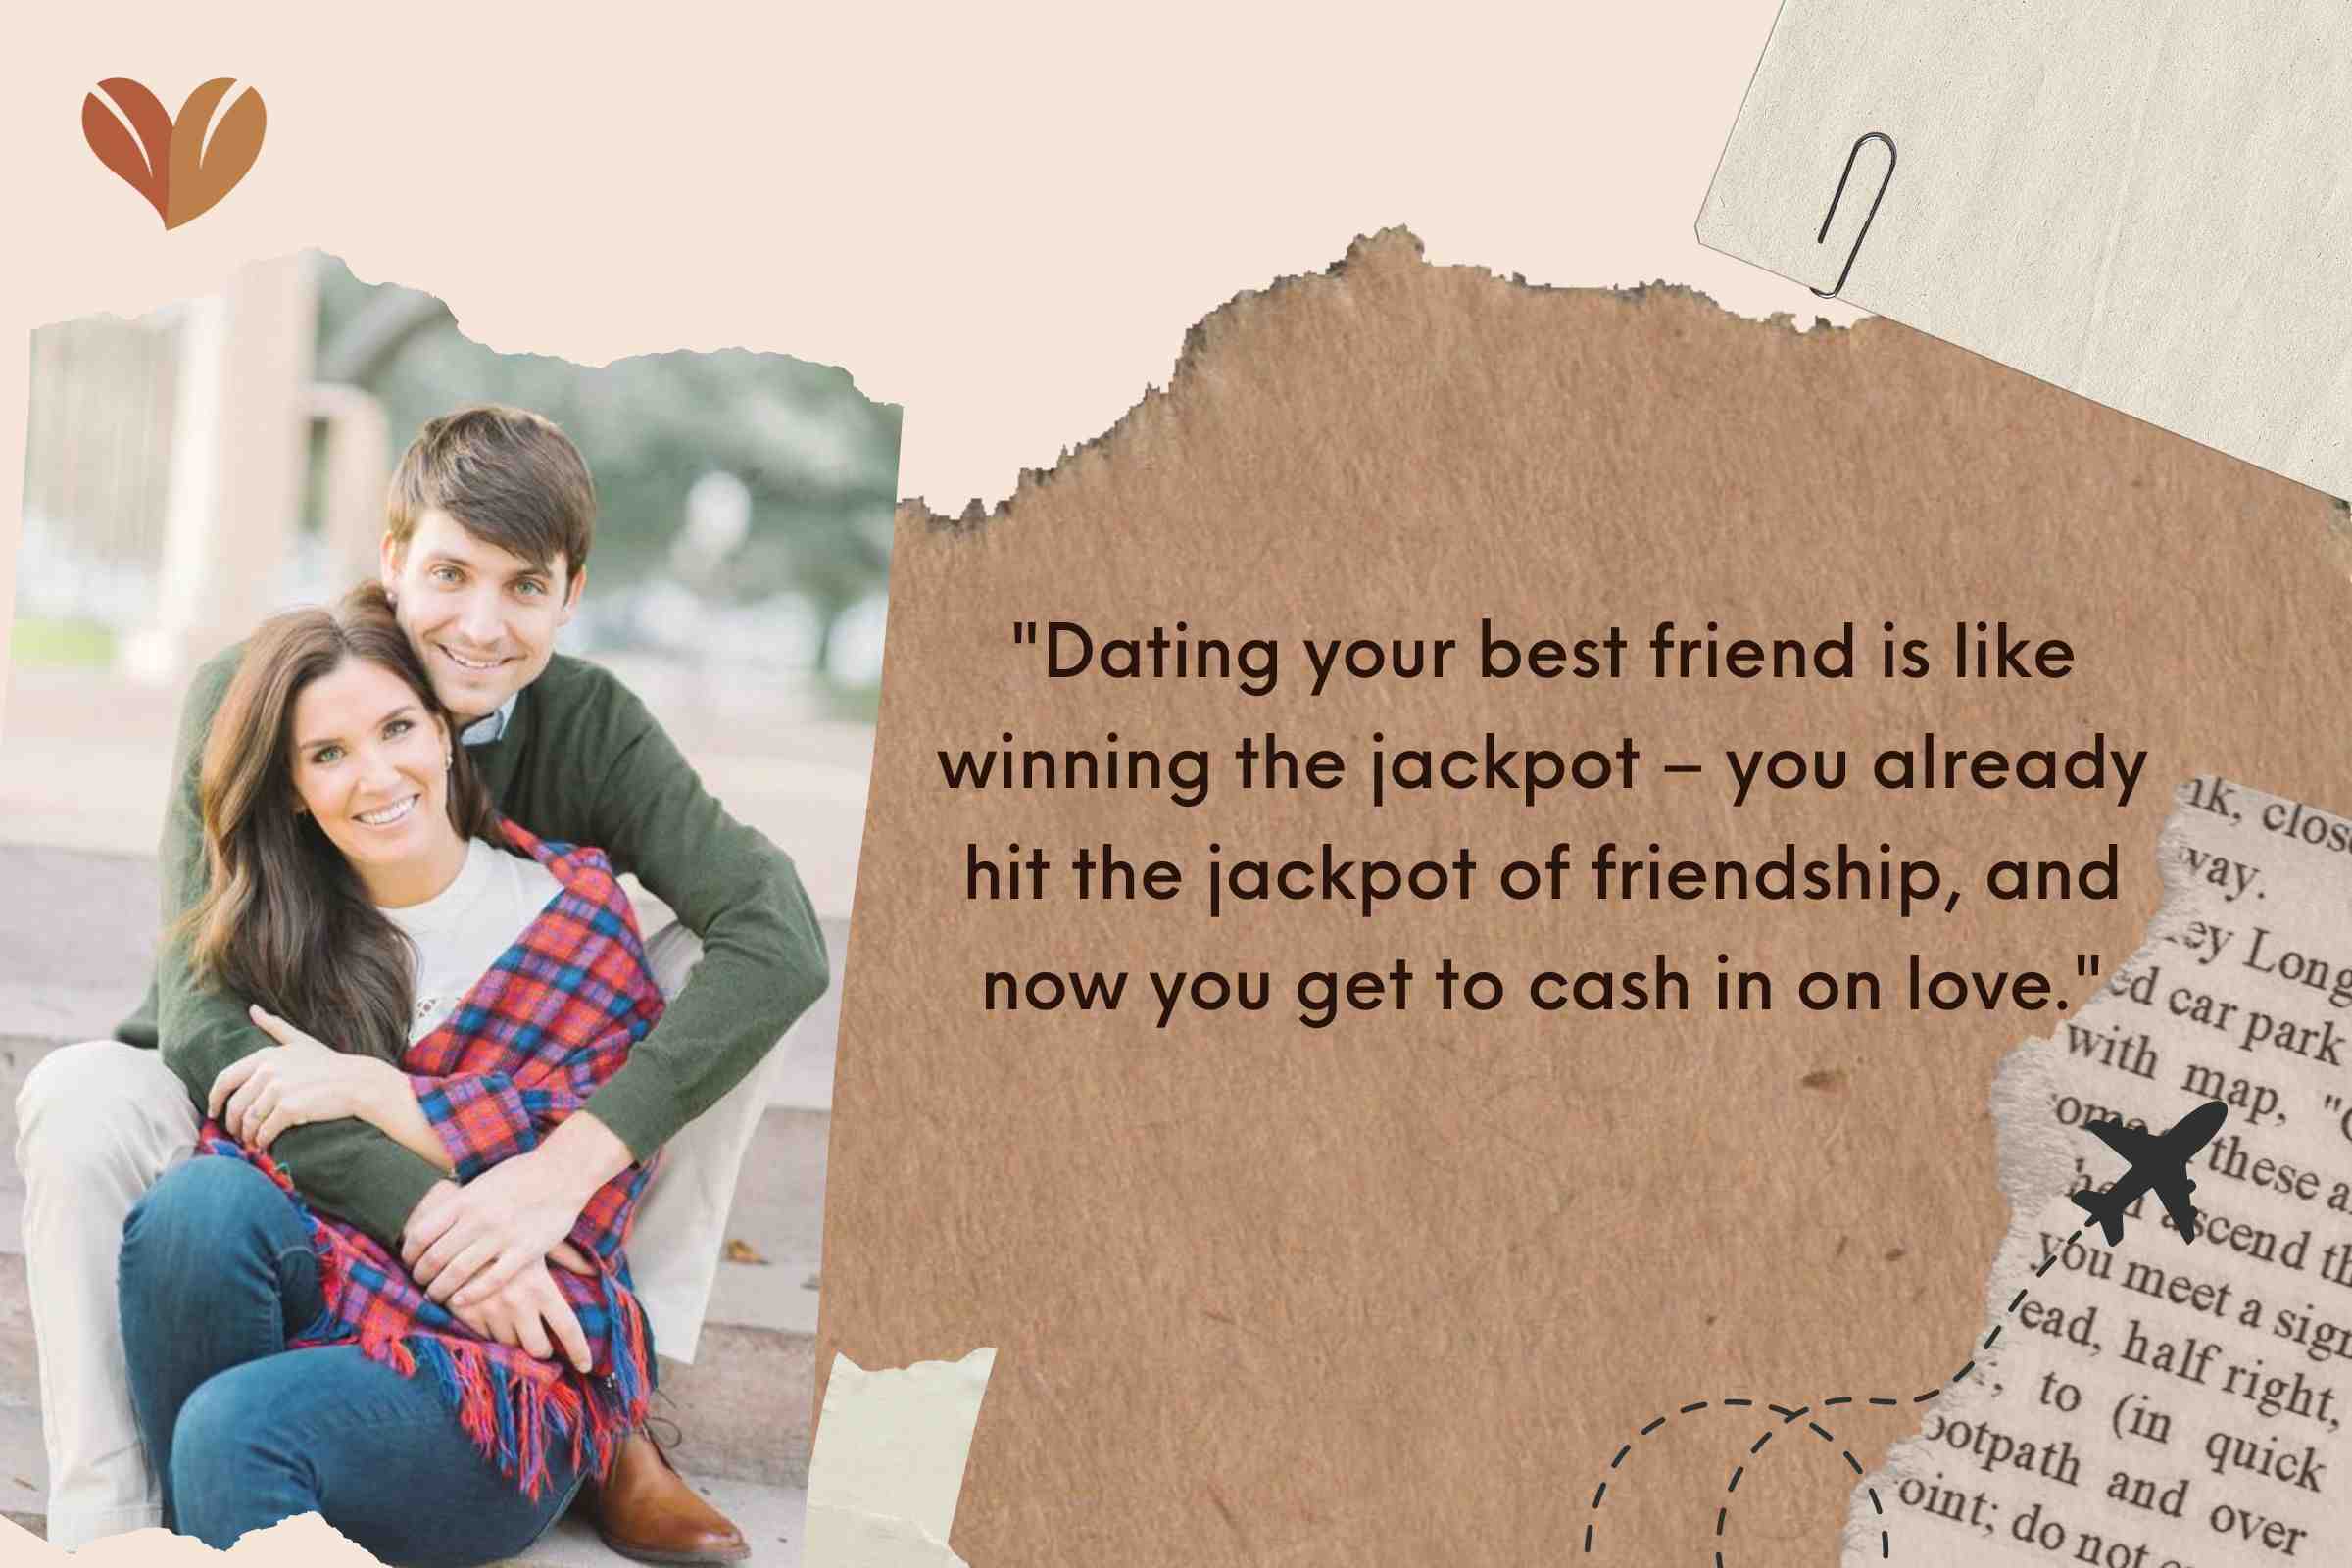 Dating your best friend is like winning the jackpot – you already hit the jackpot of friendship, and now you get to cash in on love.